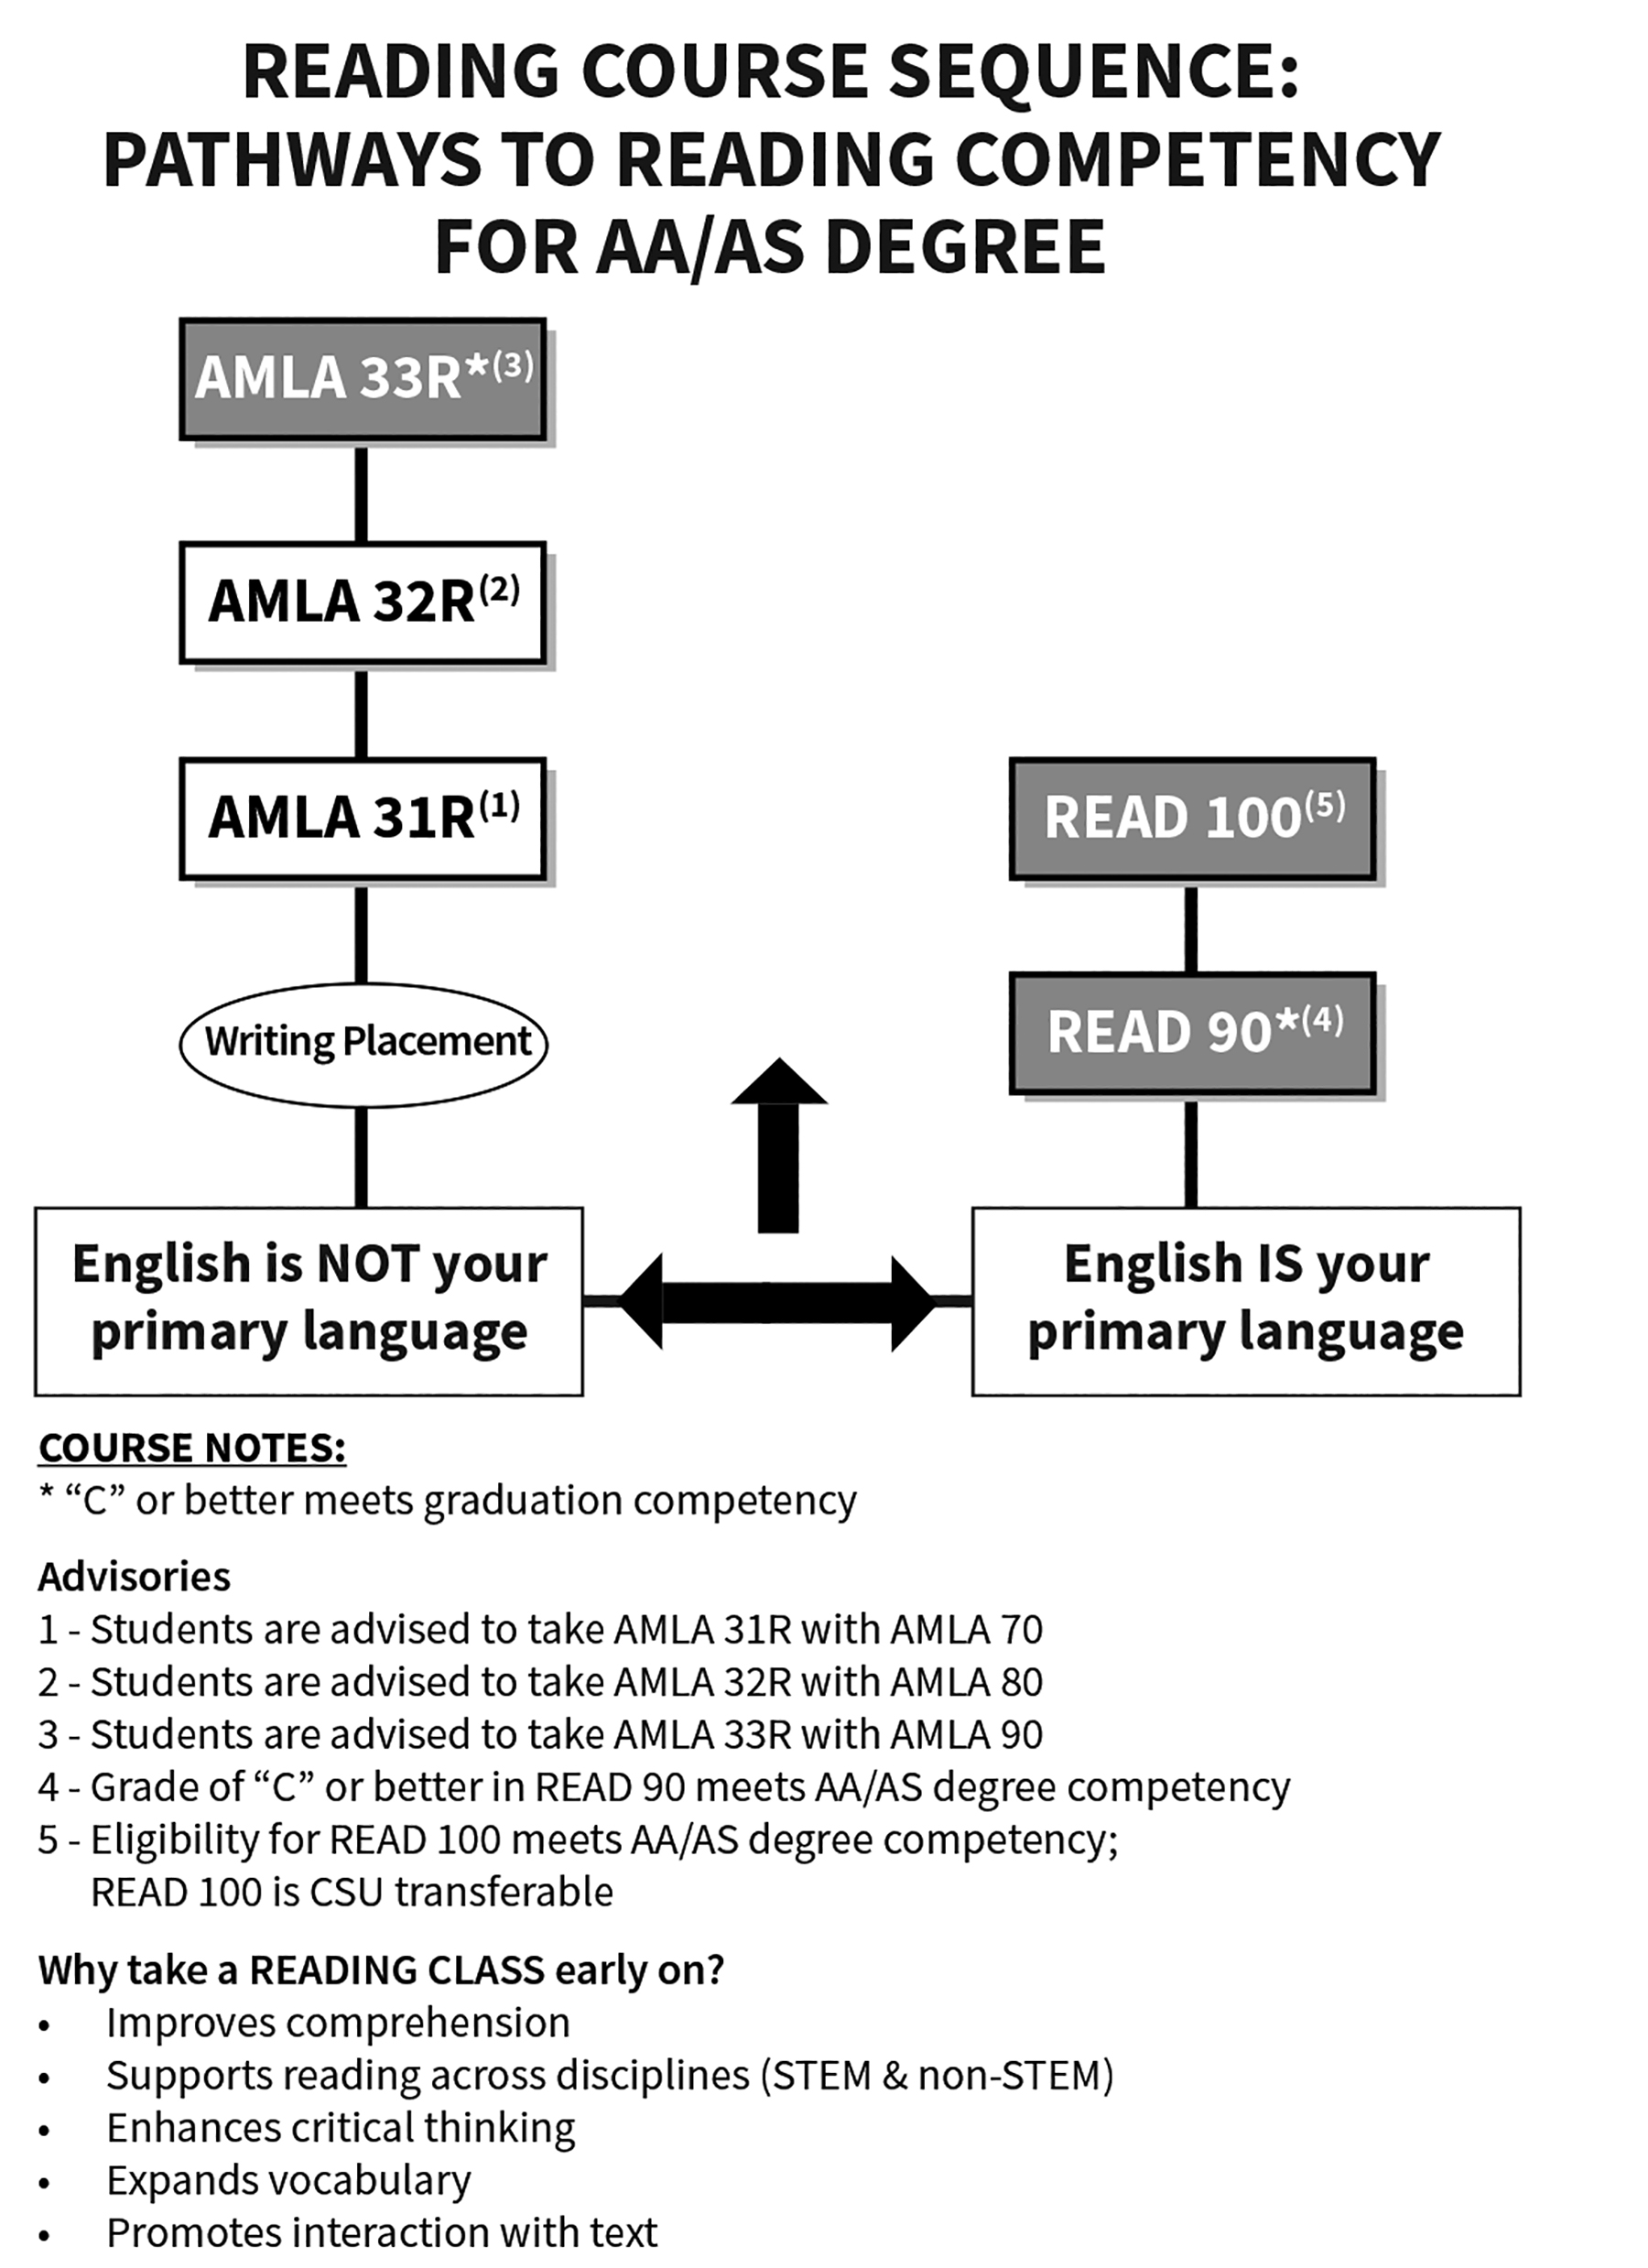 A flow chart of AMLA reading courses